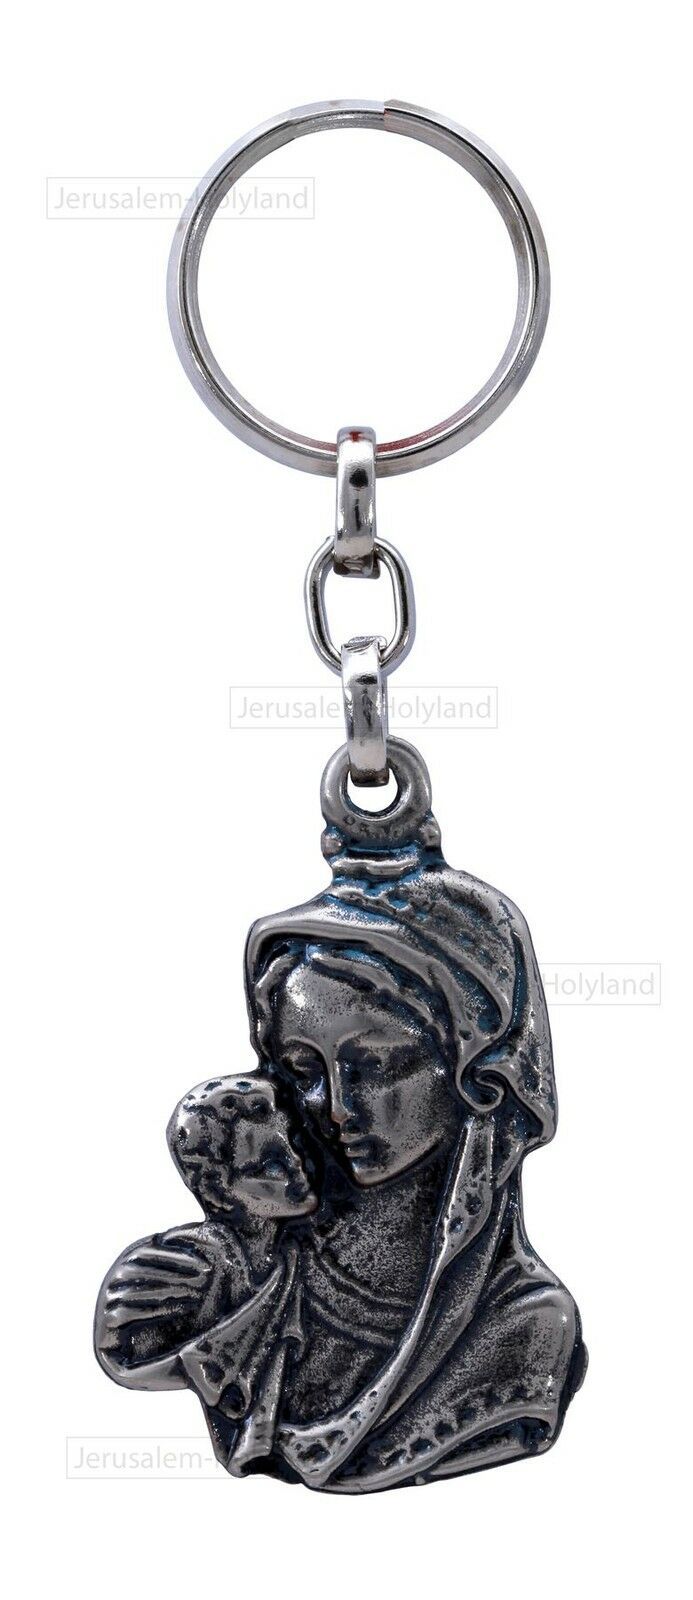 Holy mother Mary and Baby Jesus Key Chain Ring CHRISTIAN karma charm XMAS Gift